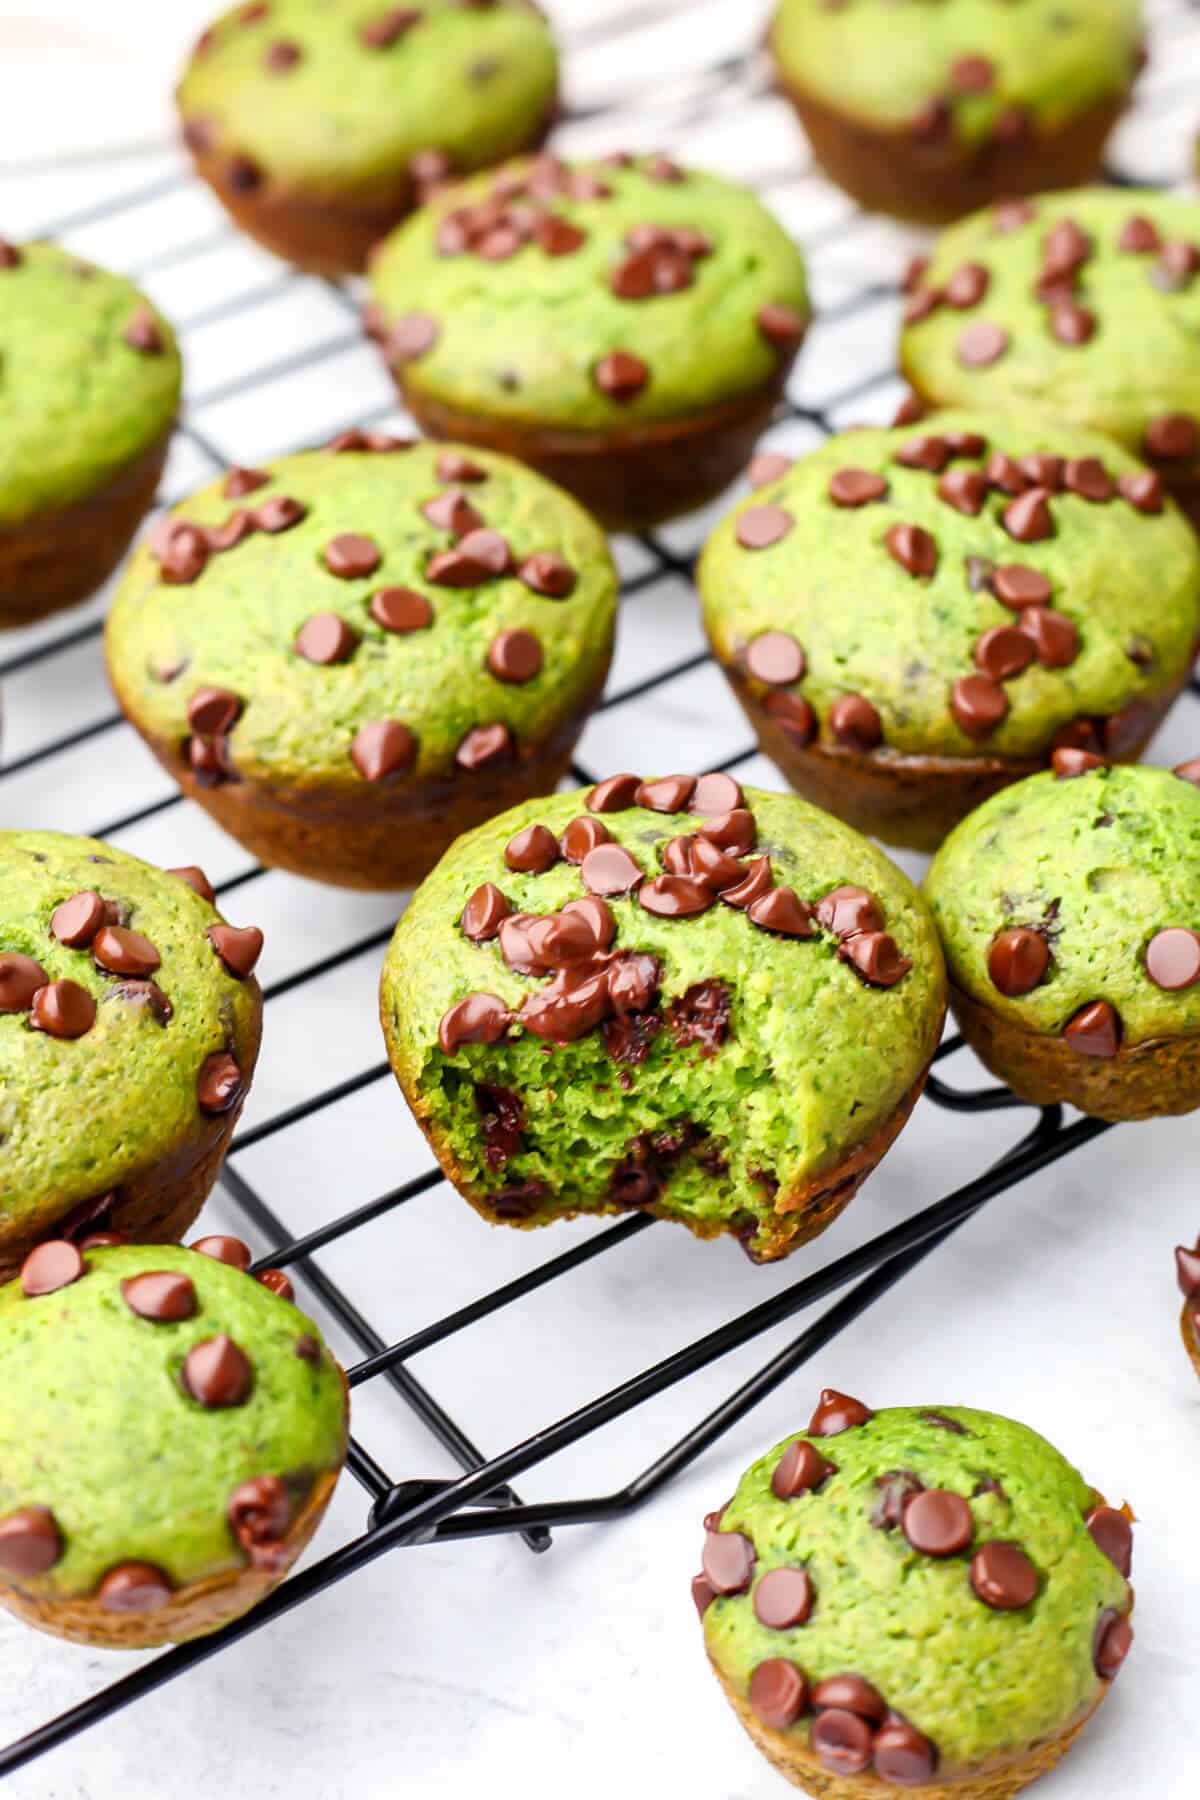 Vegan spinach muffins with chocolate chips cooling on a wire wrack.